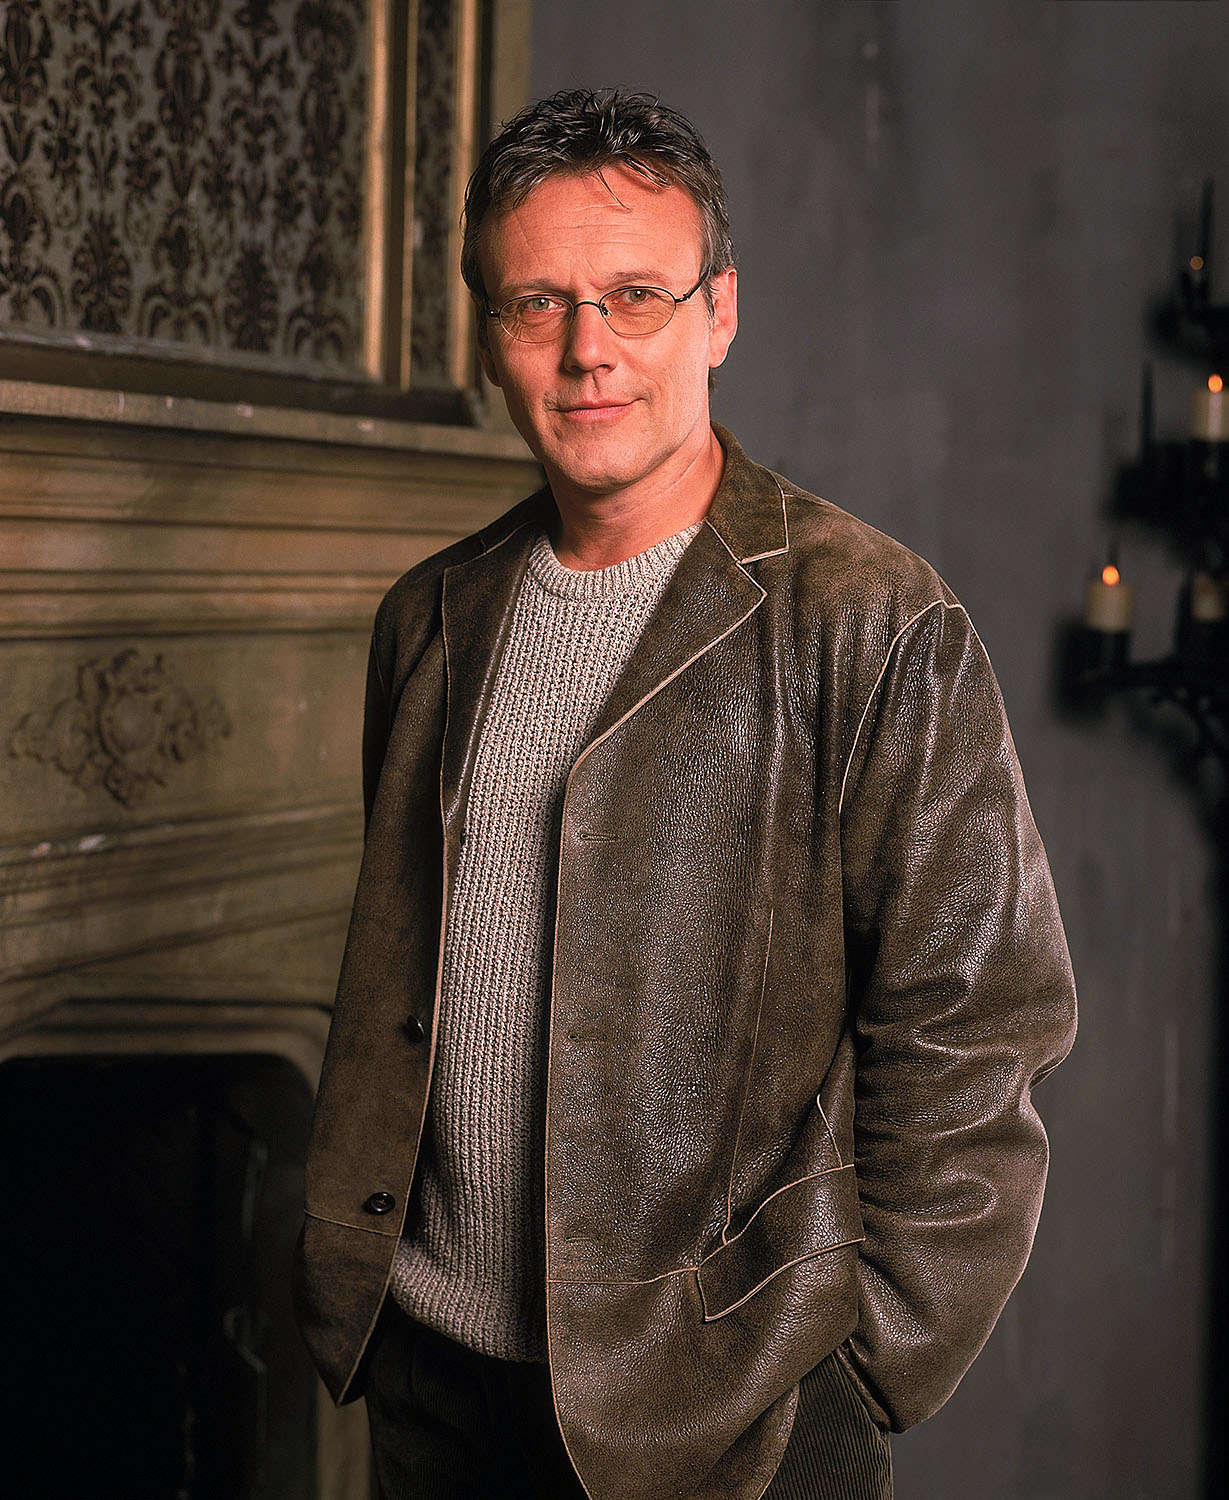 https://static.wikia.nocookie.net/buffy/images/9/97/1rupert_giles.jpg/revision/latest?cb=20210221035237